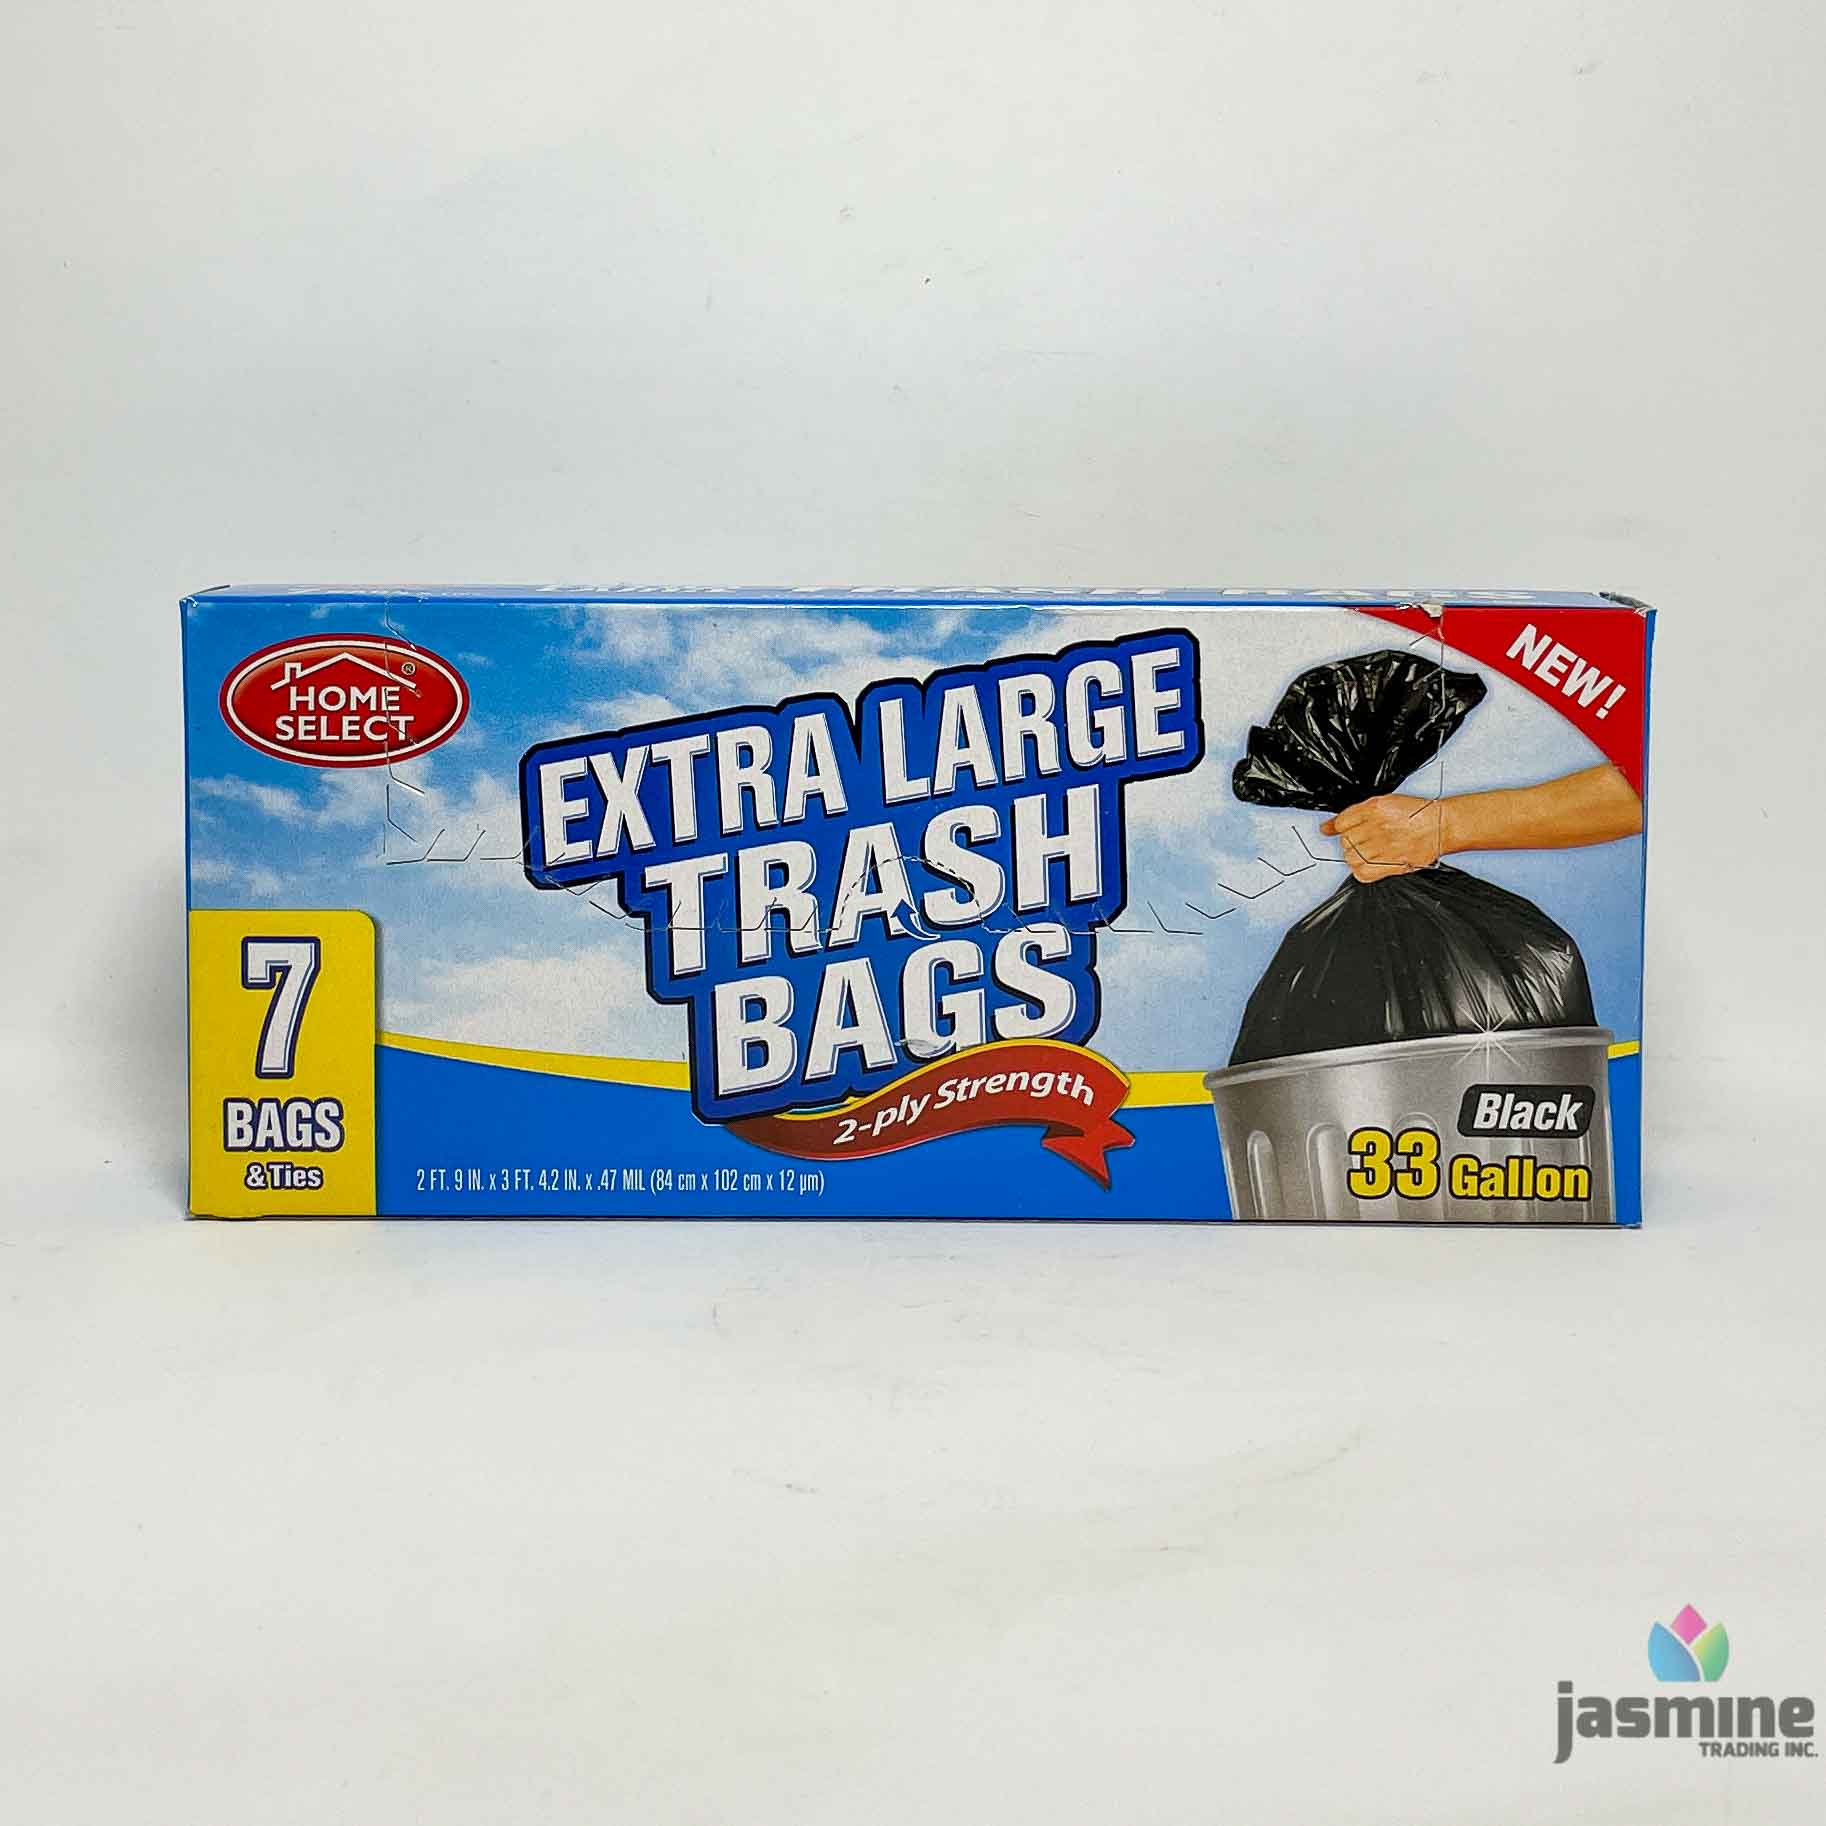 Jasmine Trading, Inc. » HOME SELECT EXTRA LARGE TRASH BAGS 33 GAL 7CT